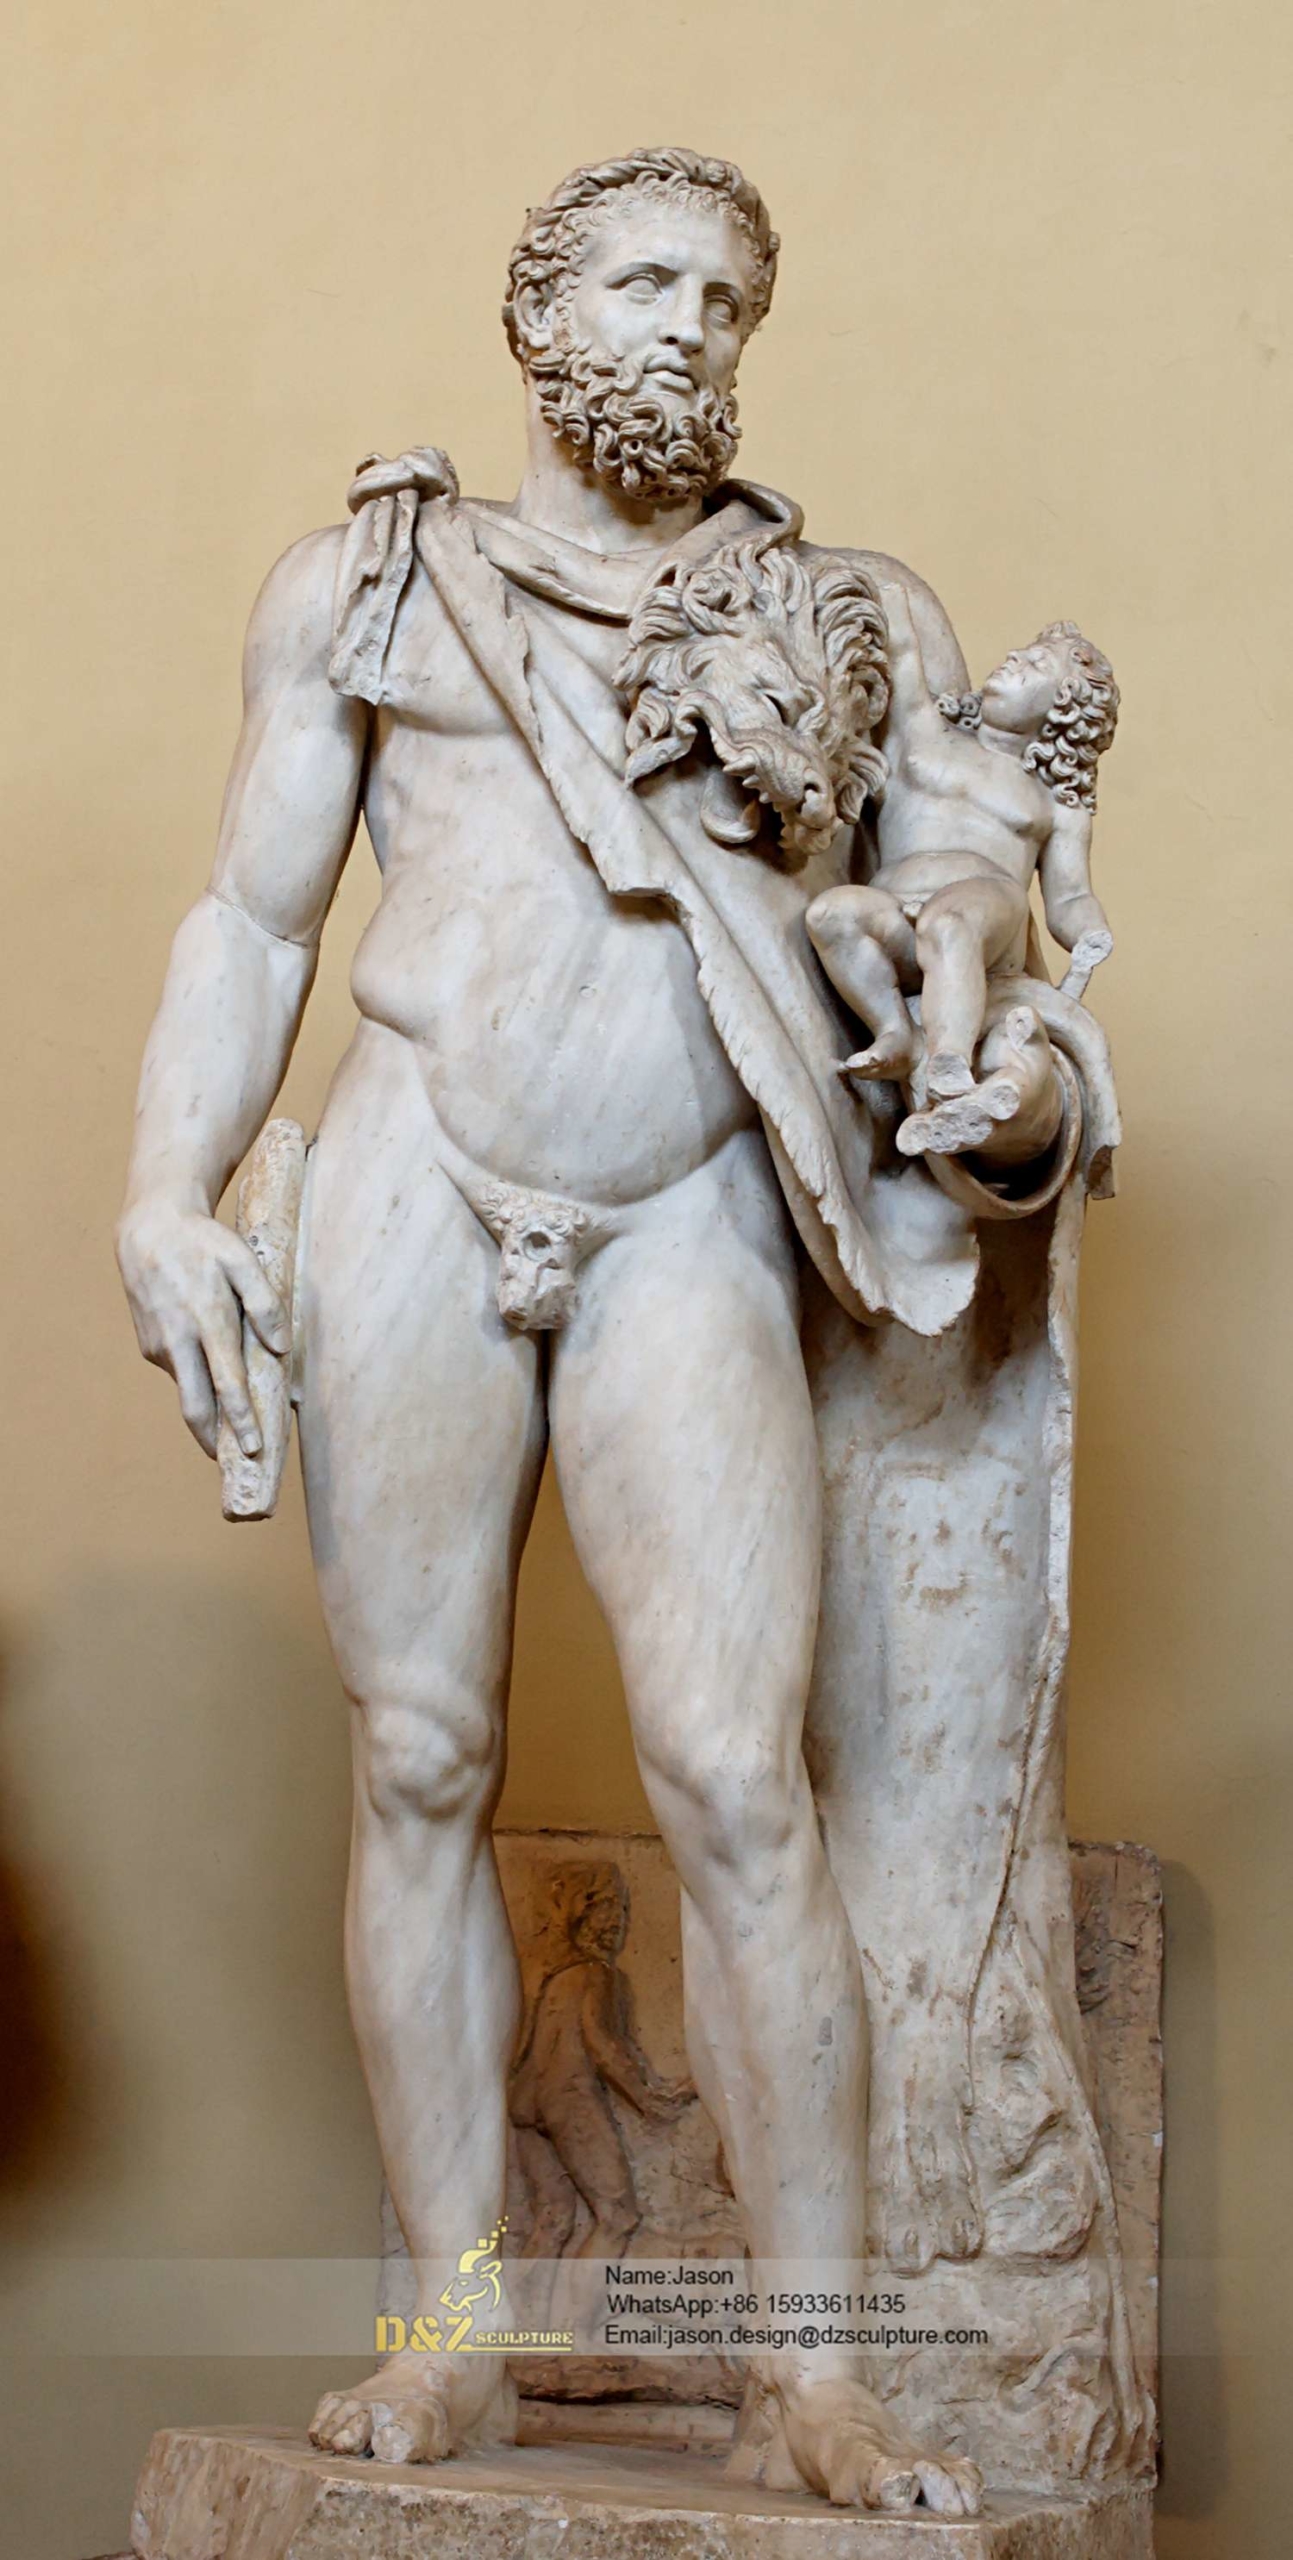 Sculpture of man holding baby